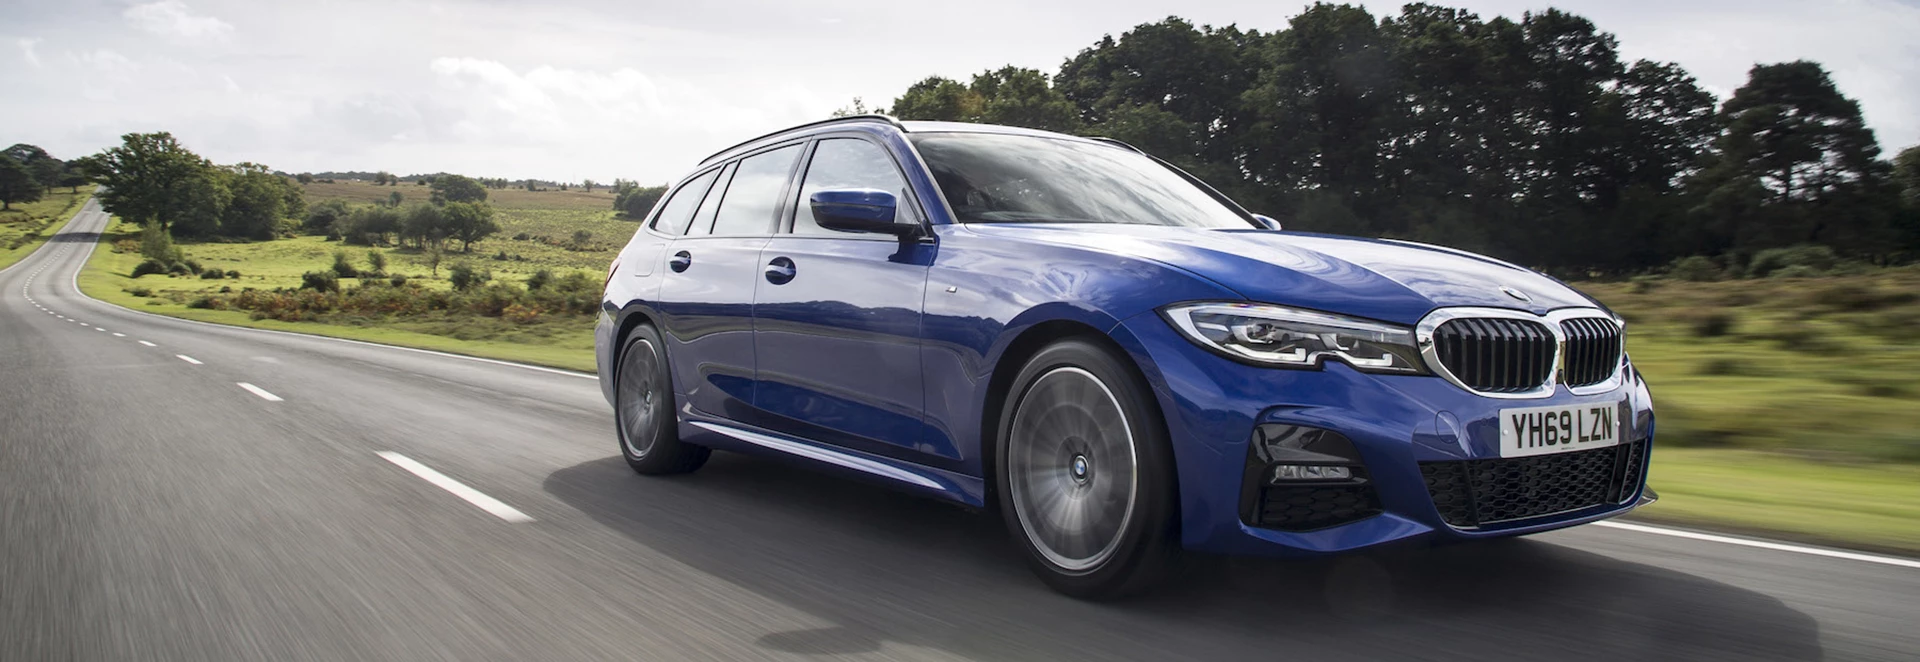 Prices and specs announced for new BMW 3 Series Touring 